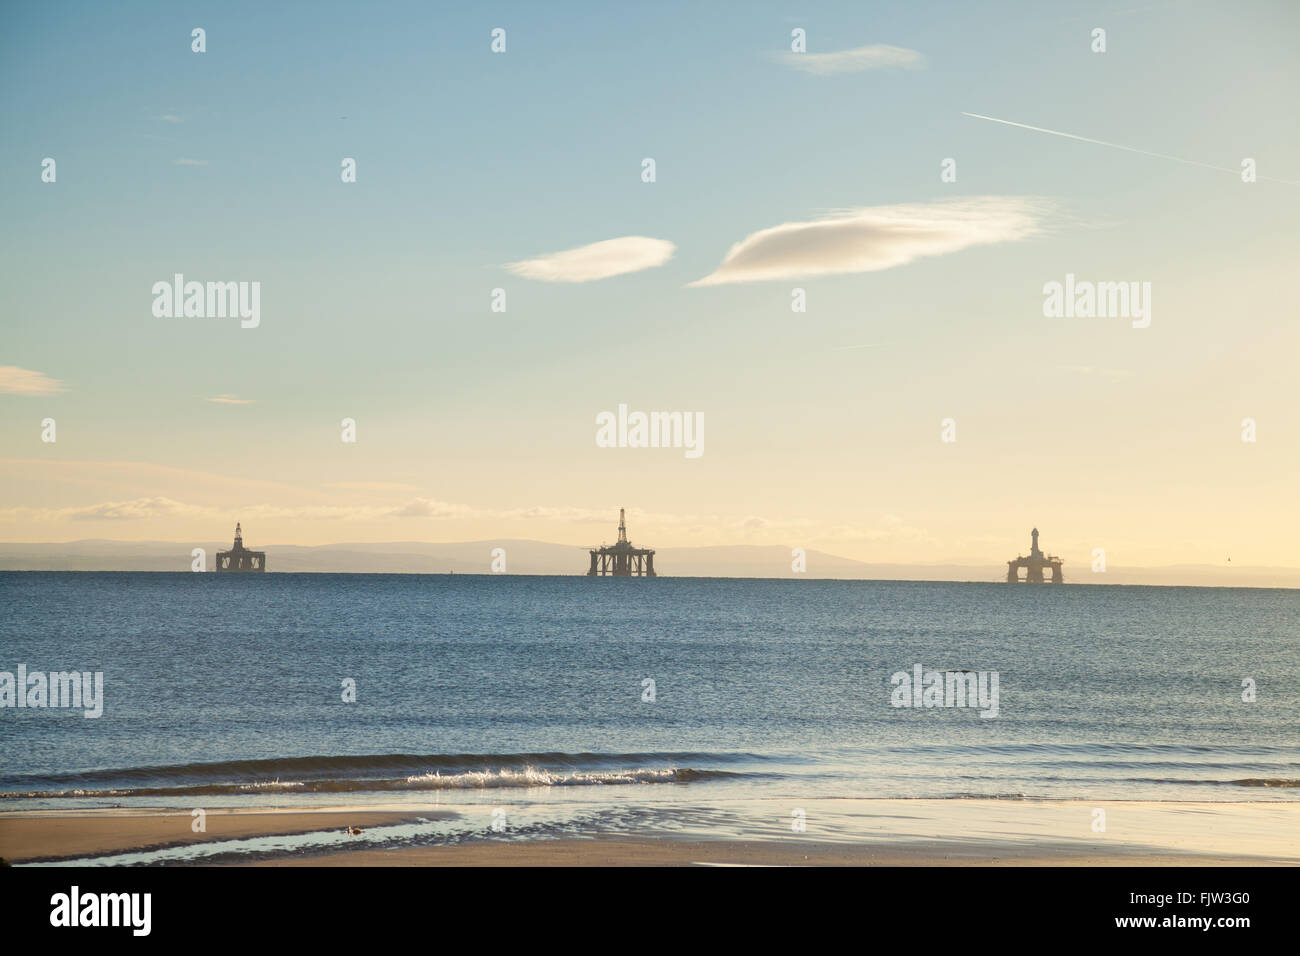 Three oil rigs sitting in the Firth of Forth near Edinburgh because of a down turn in oil production. Stock Photo